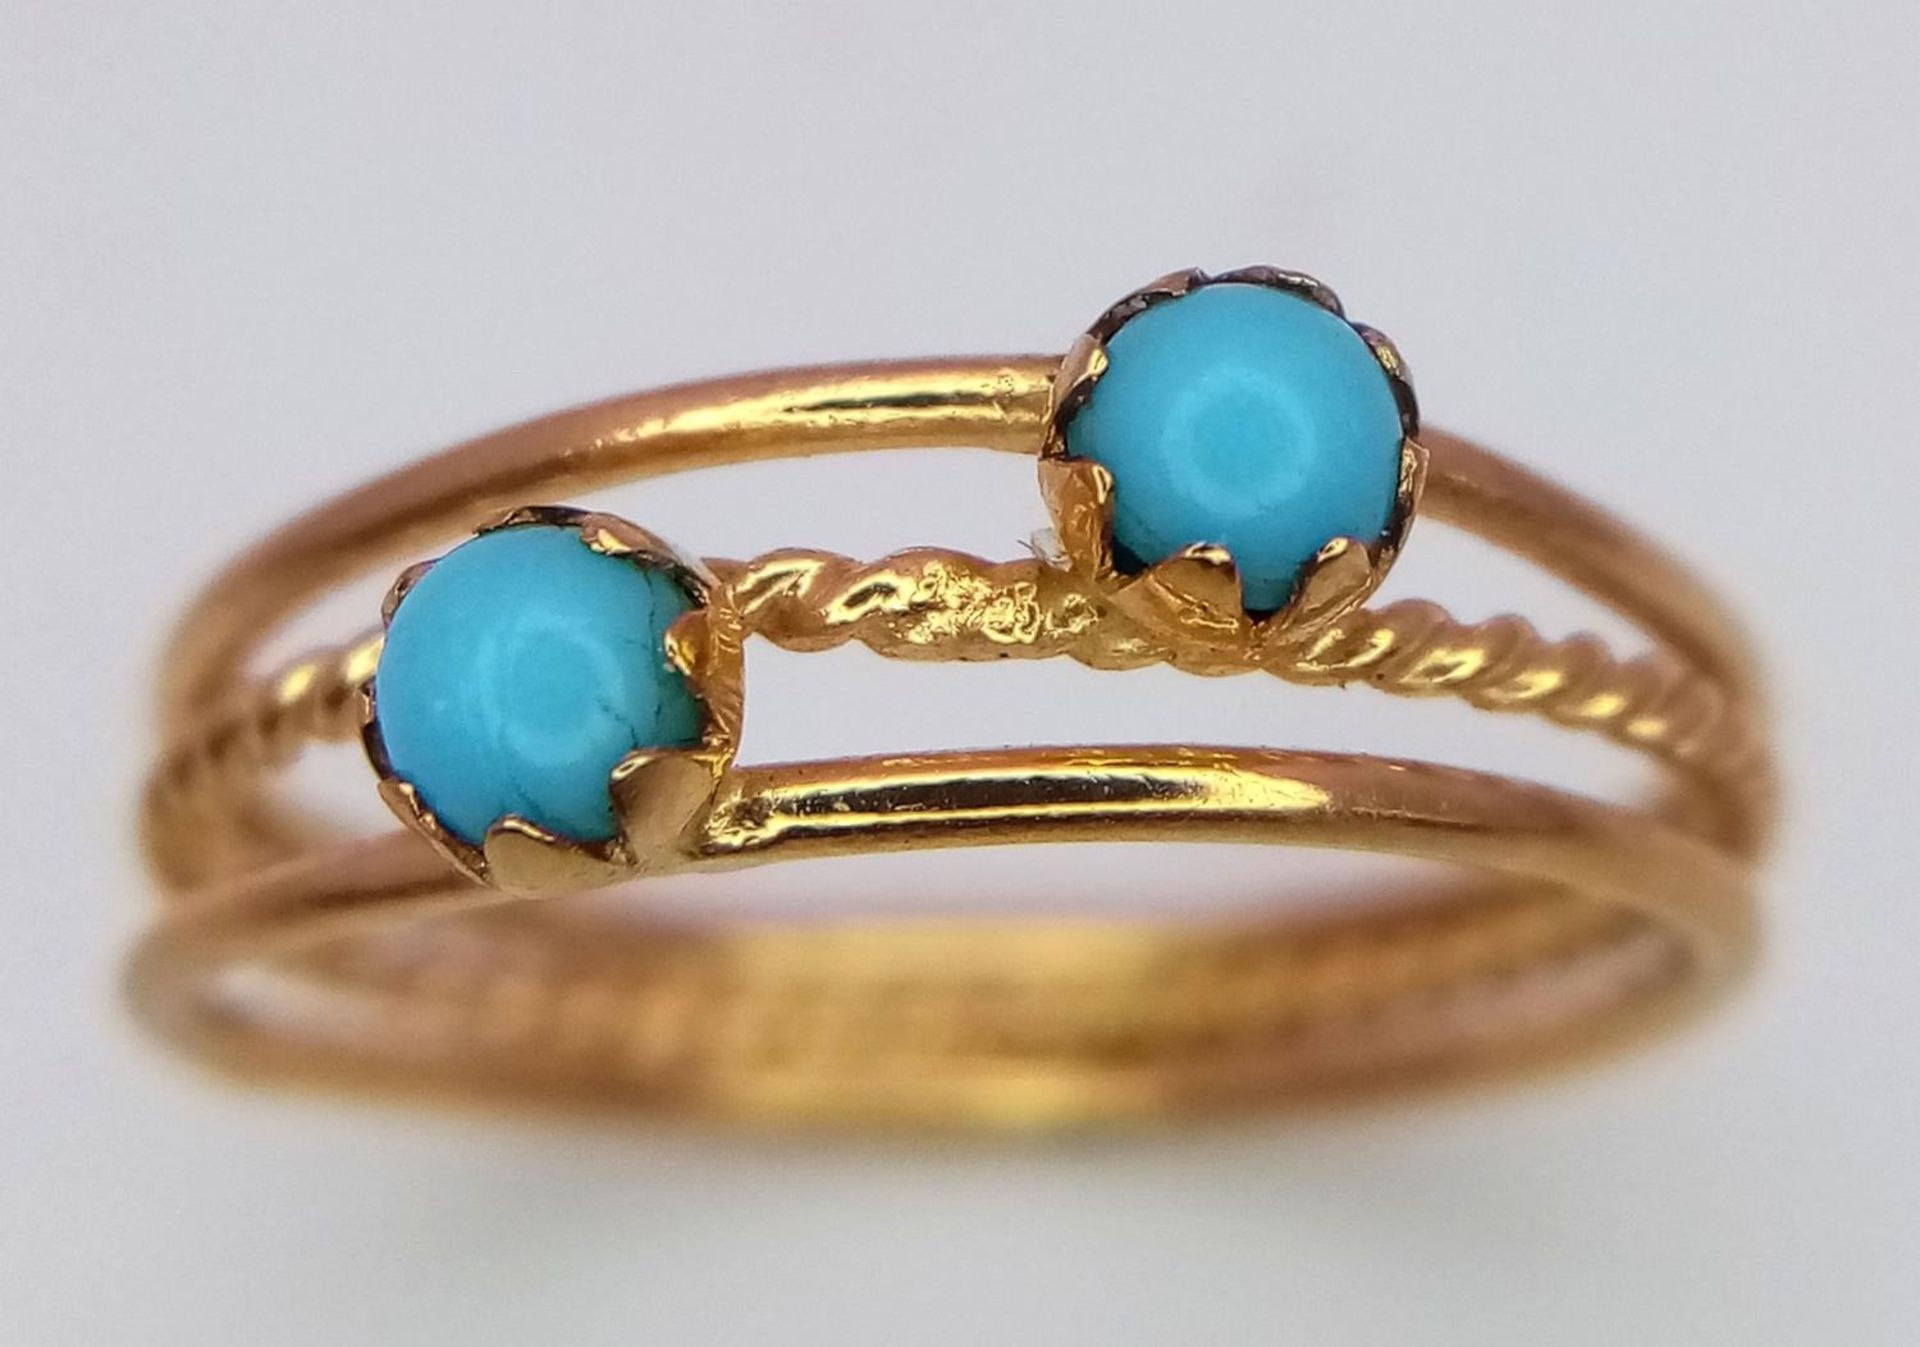 A 16ct Yellow Gold (tested as) Turquoise Band Ring, 4mm turquoise, size I 1/2, 1.6g total weight. - Image 3 of 5